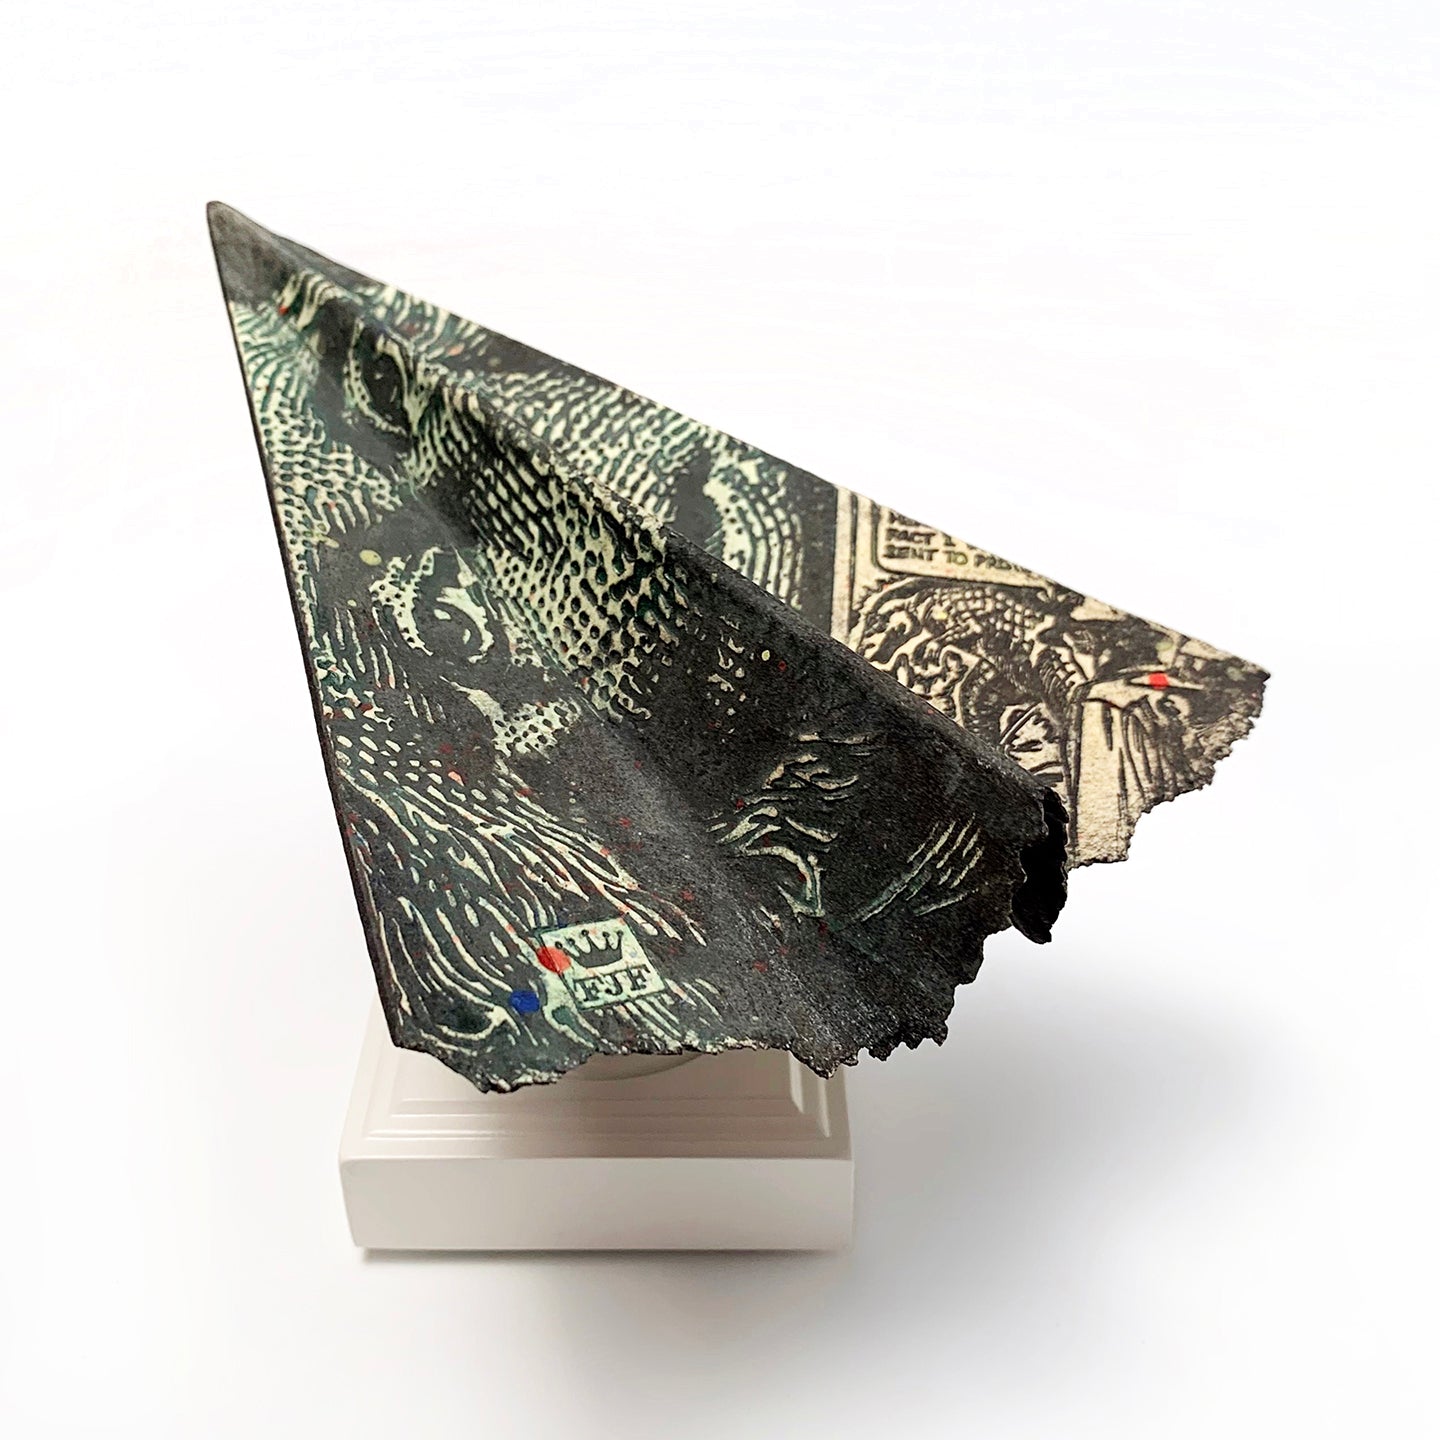 Frank James Fisher's paper airplanes are recognizable icons covered in graphics and commentary.  Paper clay with wood stand. 